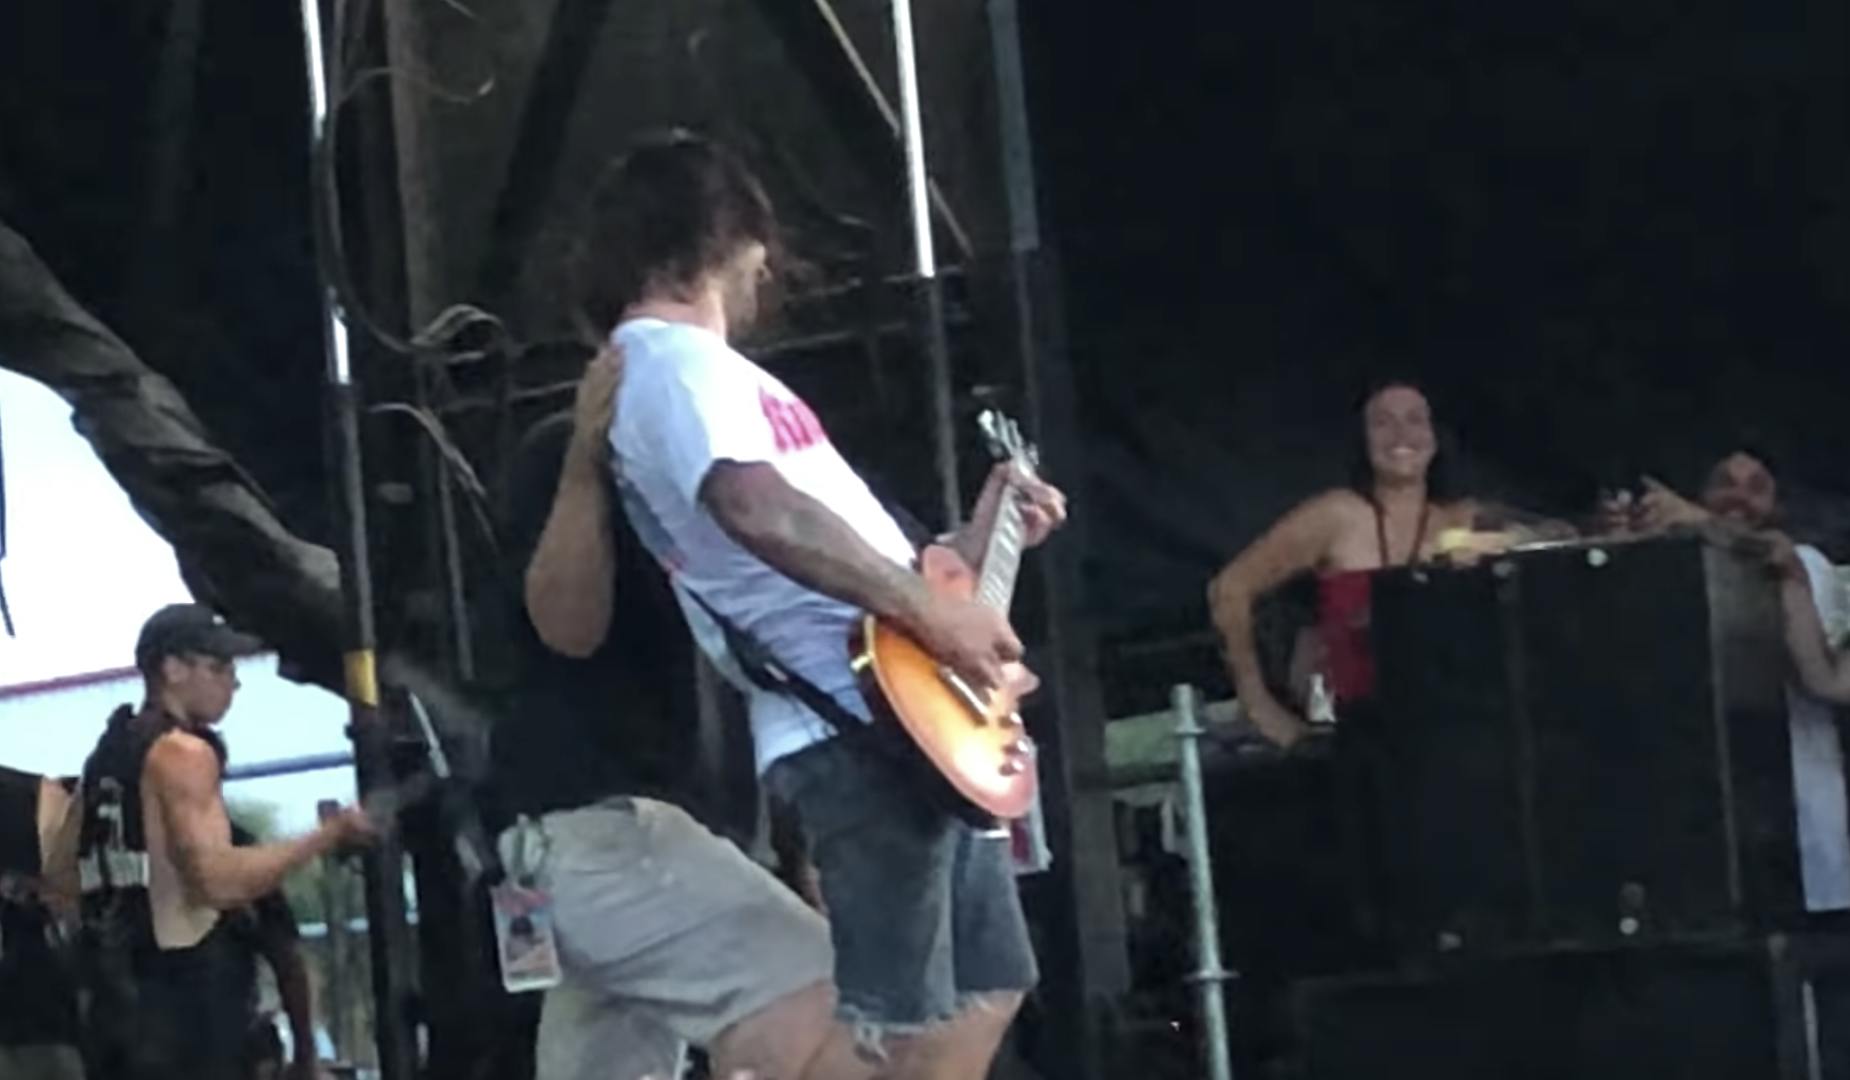 Watch Every Time I Die’s Jordan Buckley Get Cut Off Playing The Last Note Ever On The Vans Warped Tour